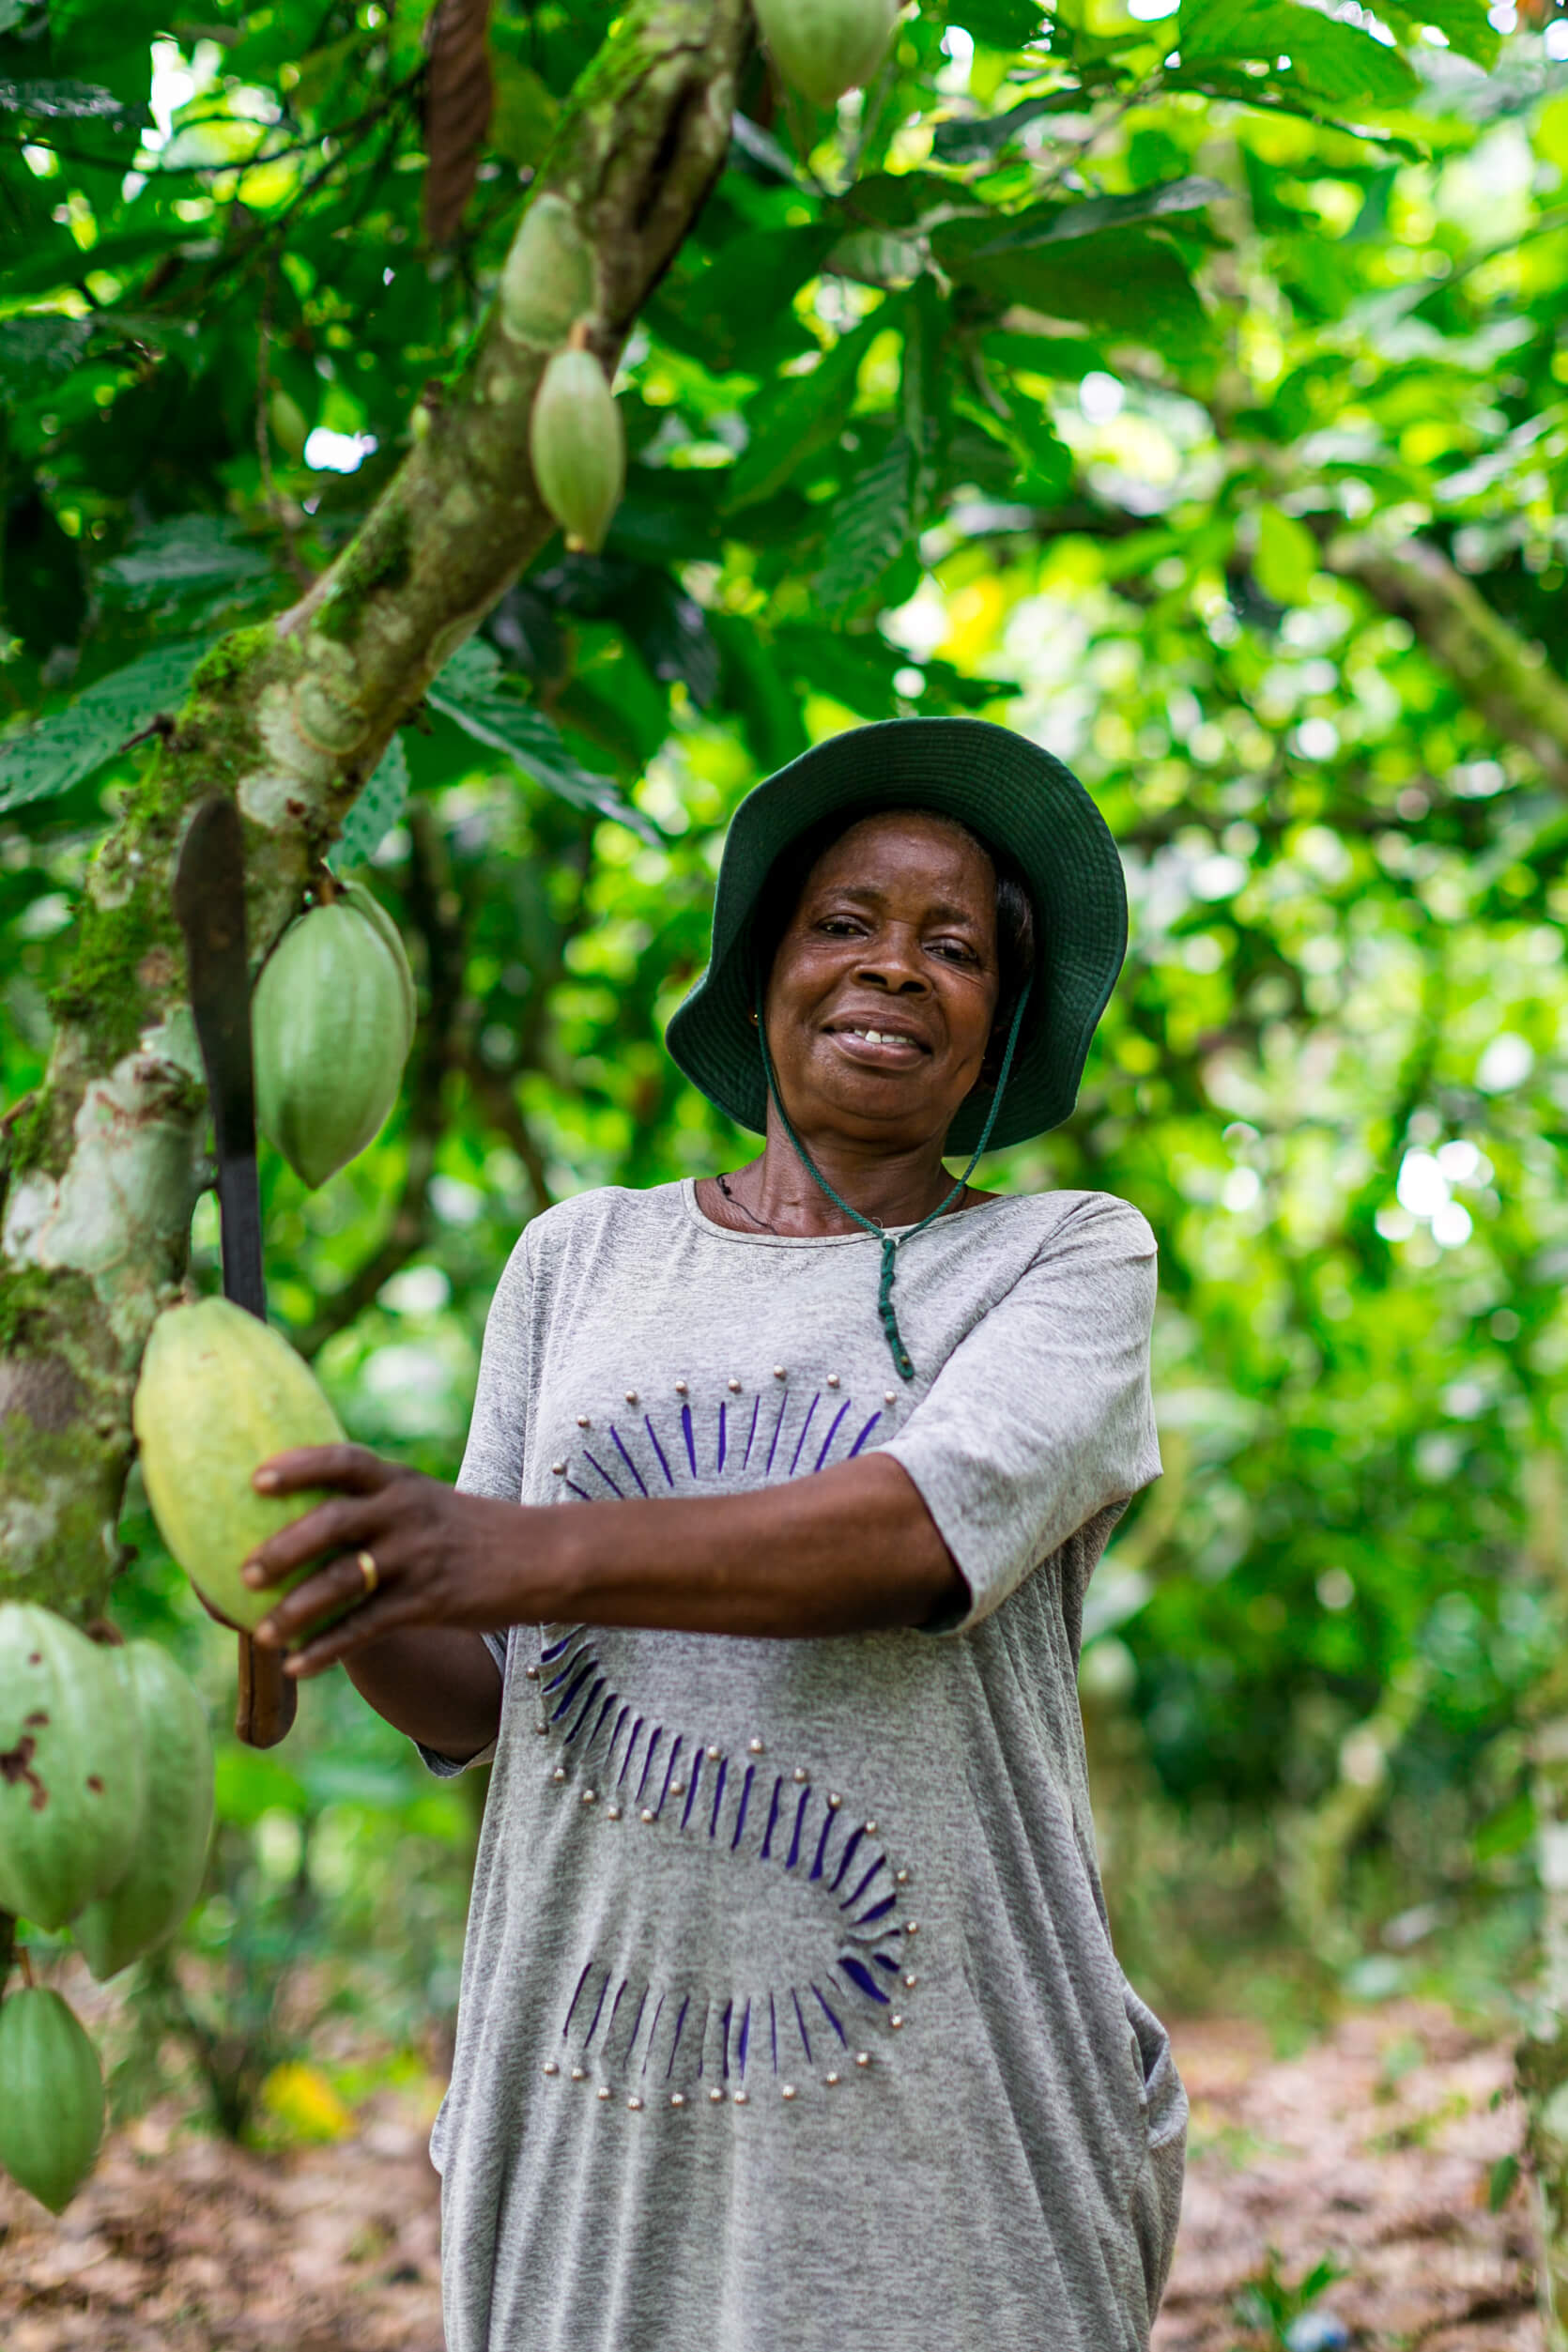 New Fairtrade report explores possibilities for accelerating progress on sustainable livelihoods for Ghanaian cocoa farmers